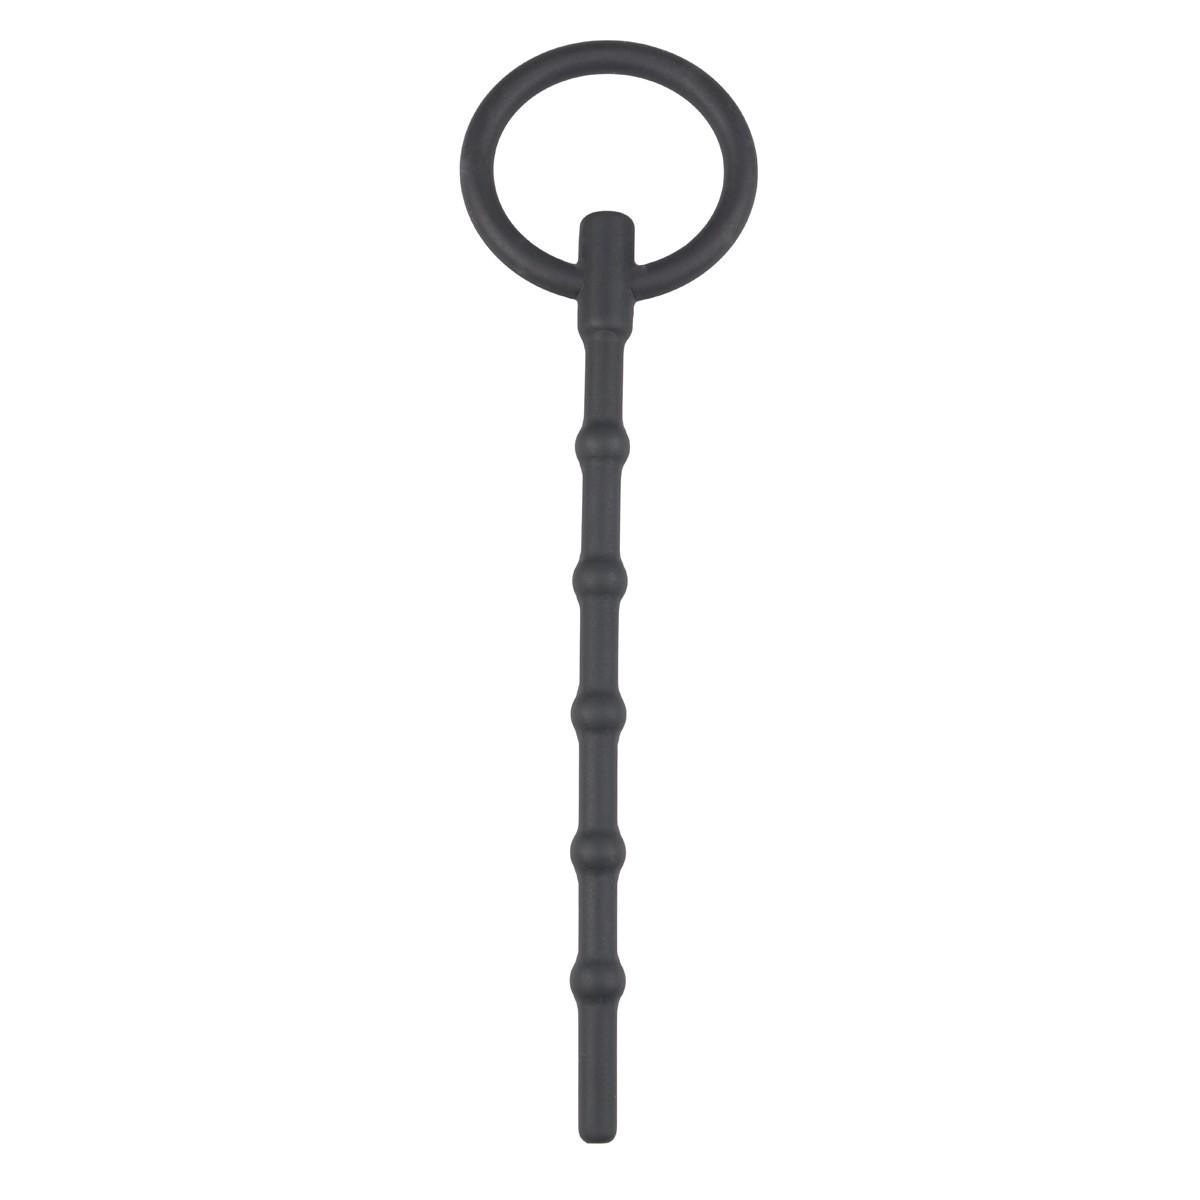 Sinner Gear Long Hollow Silicone Penis Plug 5–8 mm